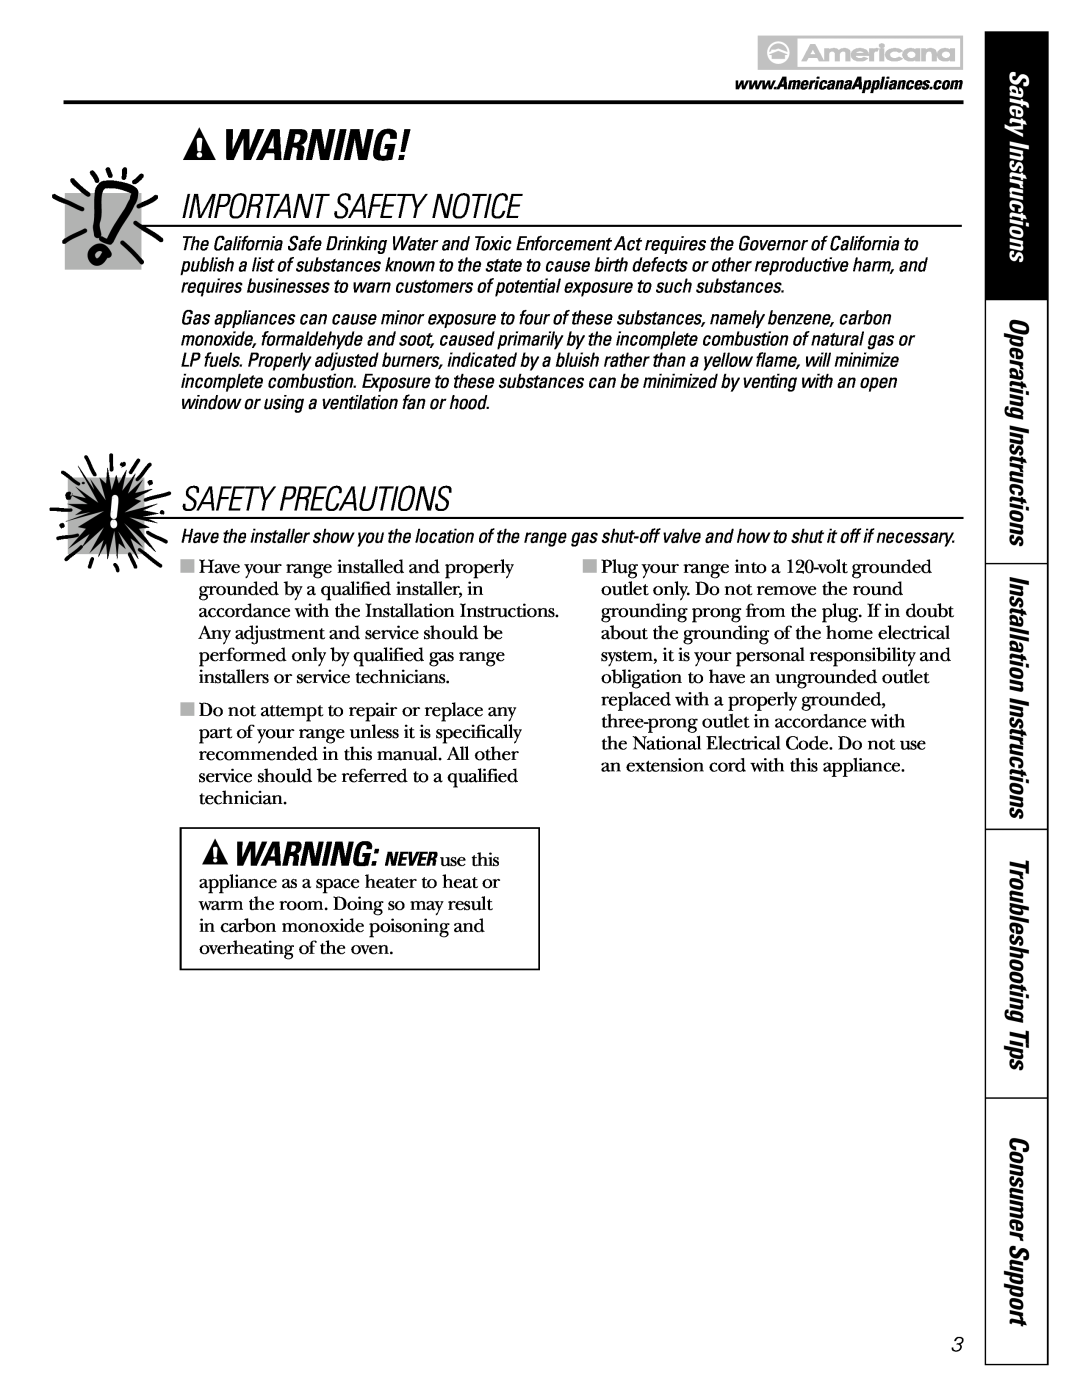 Americana Appliances AGBS300 installation instructions Important Safety Notice, Safety Precautions, WARNING NEVER use this 